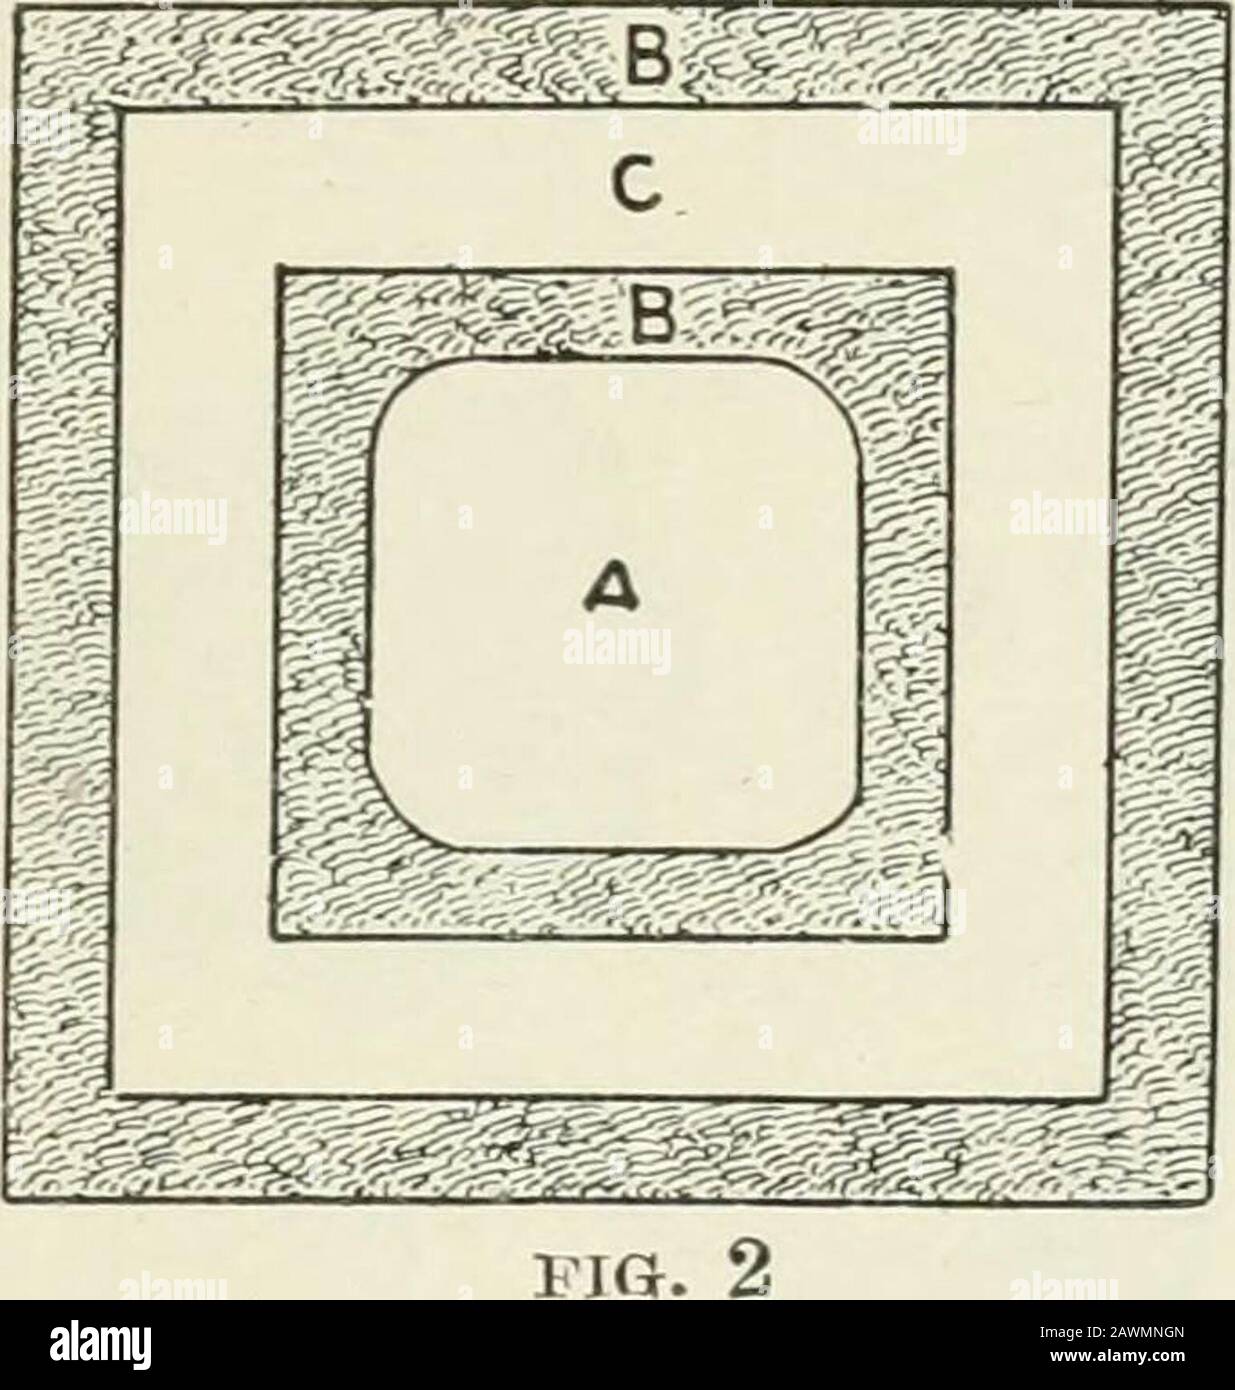 Garden planning and planting . FIG. 1. the old Yellow Stonecrop ; the centre round A remains the onlyspace requiring taller plants, which might be followed by whiteHyacinths. London Pride, other Saxifrages and Sedums, Thymes, orArabis albida variegata might be used for the surrounding of otherbeds. A tine show is suggested by Fig. 4 (p. 58). The evergreen portioncould be Ajuga osmafera, which has blue blossom from April to June,or London Pride would be a safe choice ; but Heucheras look wellused in a large bed, as their leaves are very close growing and charm-ingly autumn tinted, though not st Stock Photo